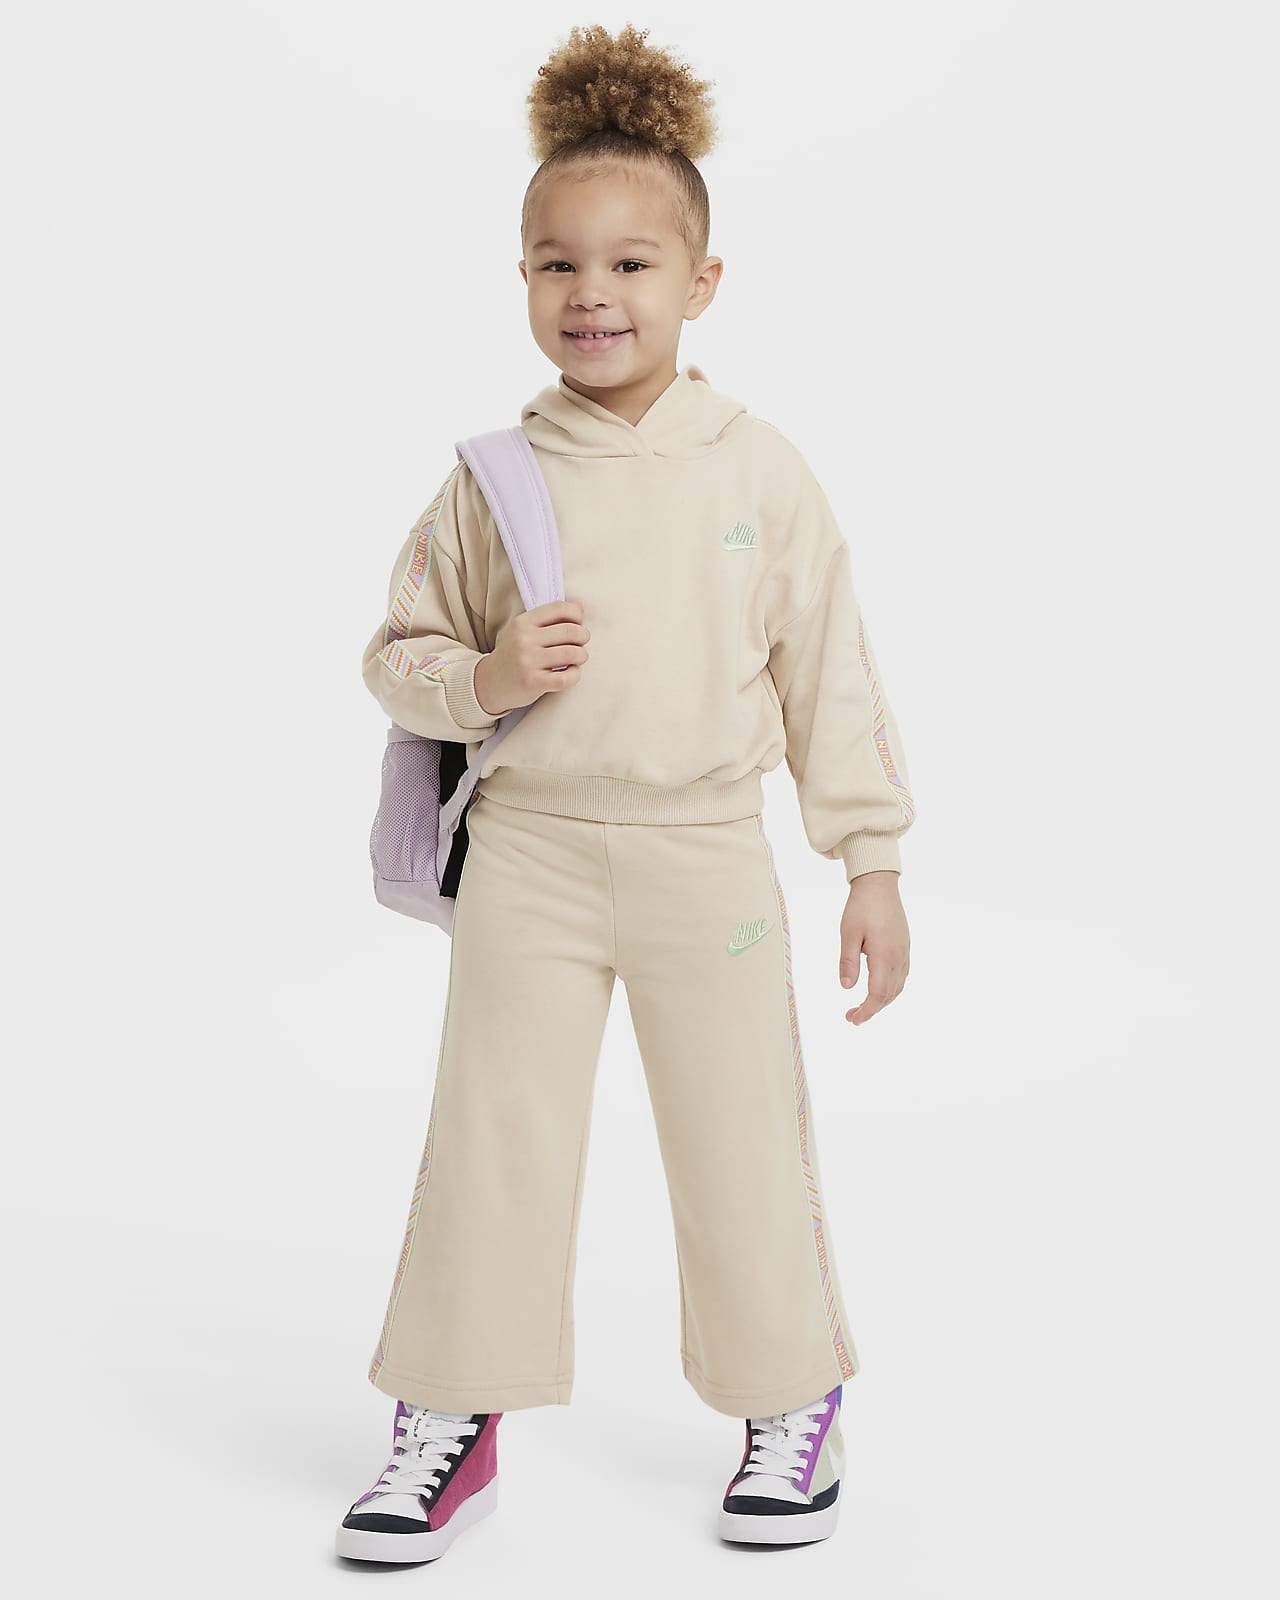 Nike Happy Camper Toddler French Terry Set